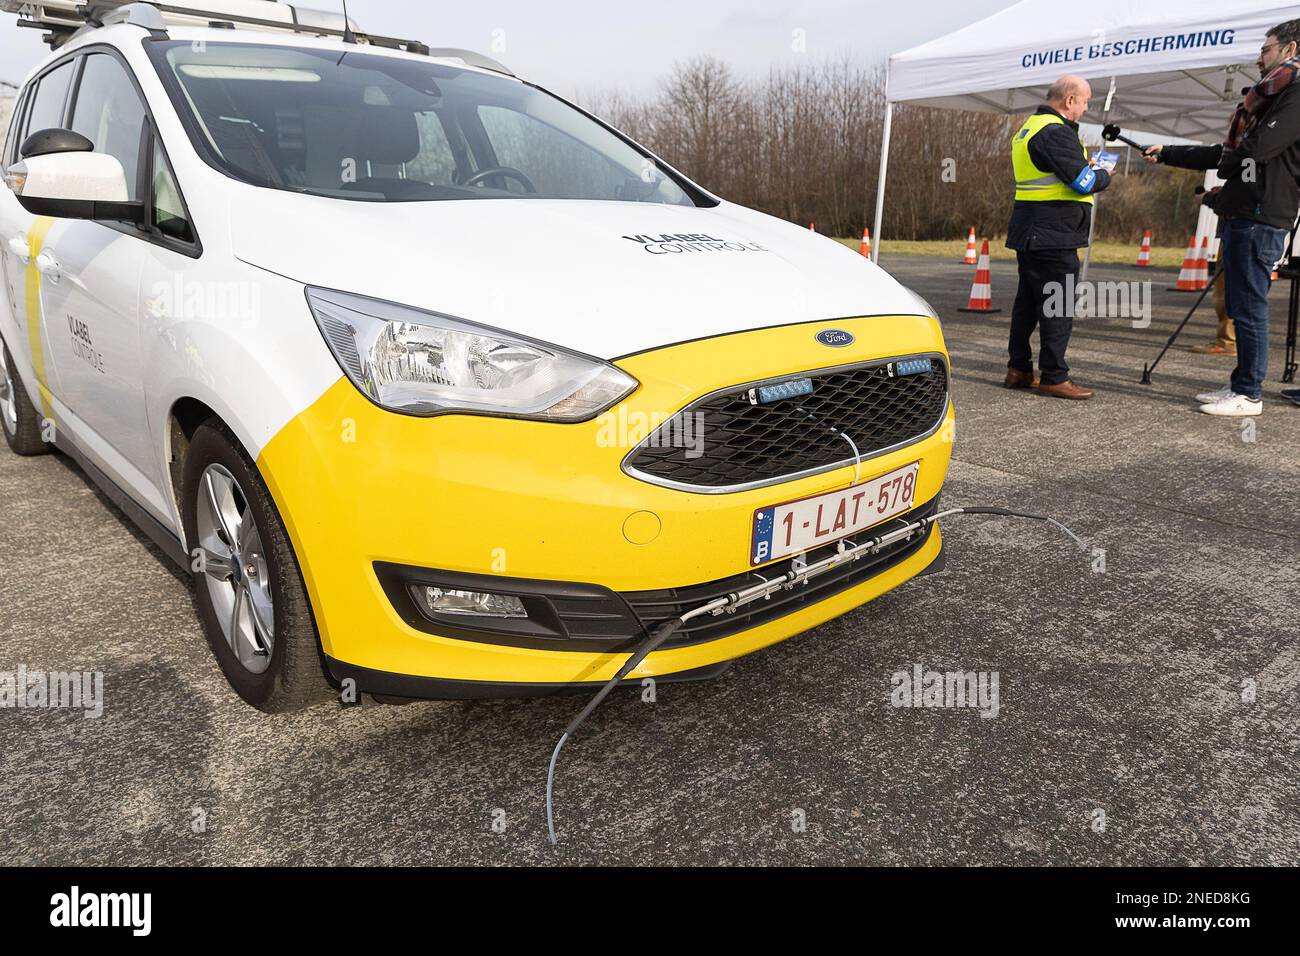 Illustration picture shows a sniff car who measures the particulate matter content of trucks pictured during a major control action 'Albatross' by the police, customs and inspection services on the E40 highway in Wetteren, Thursday 16 February 2023. Federal and local police services, customs, various inspection services and a delegation of inspectors from the Netherlands and Denmark will today check trucks and buses at the motorway parking areas along the E40 in Wetteren. Coordinated by the East Flanders Road Police, under the watchful eye of the public prosecutor's office and labor auditor of Stock Photo